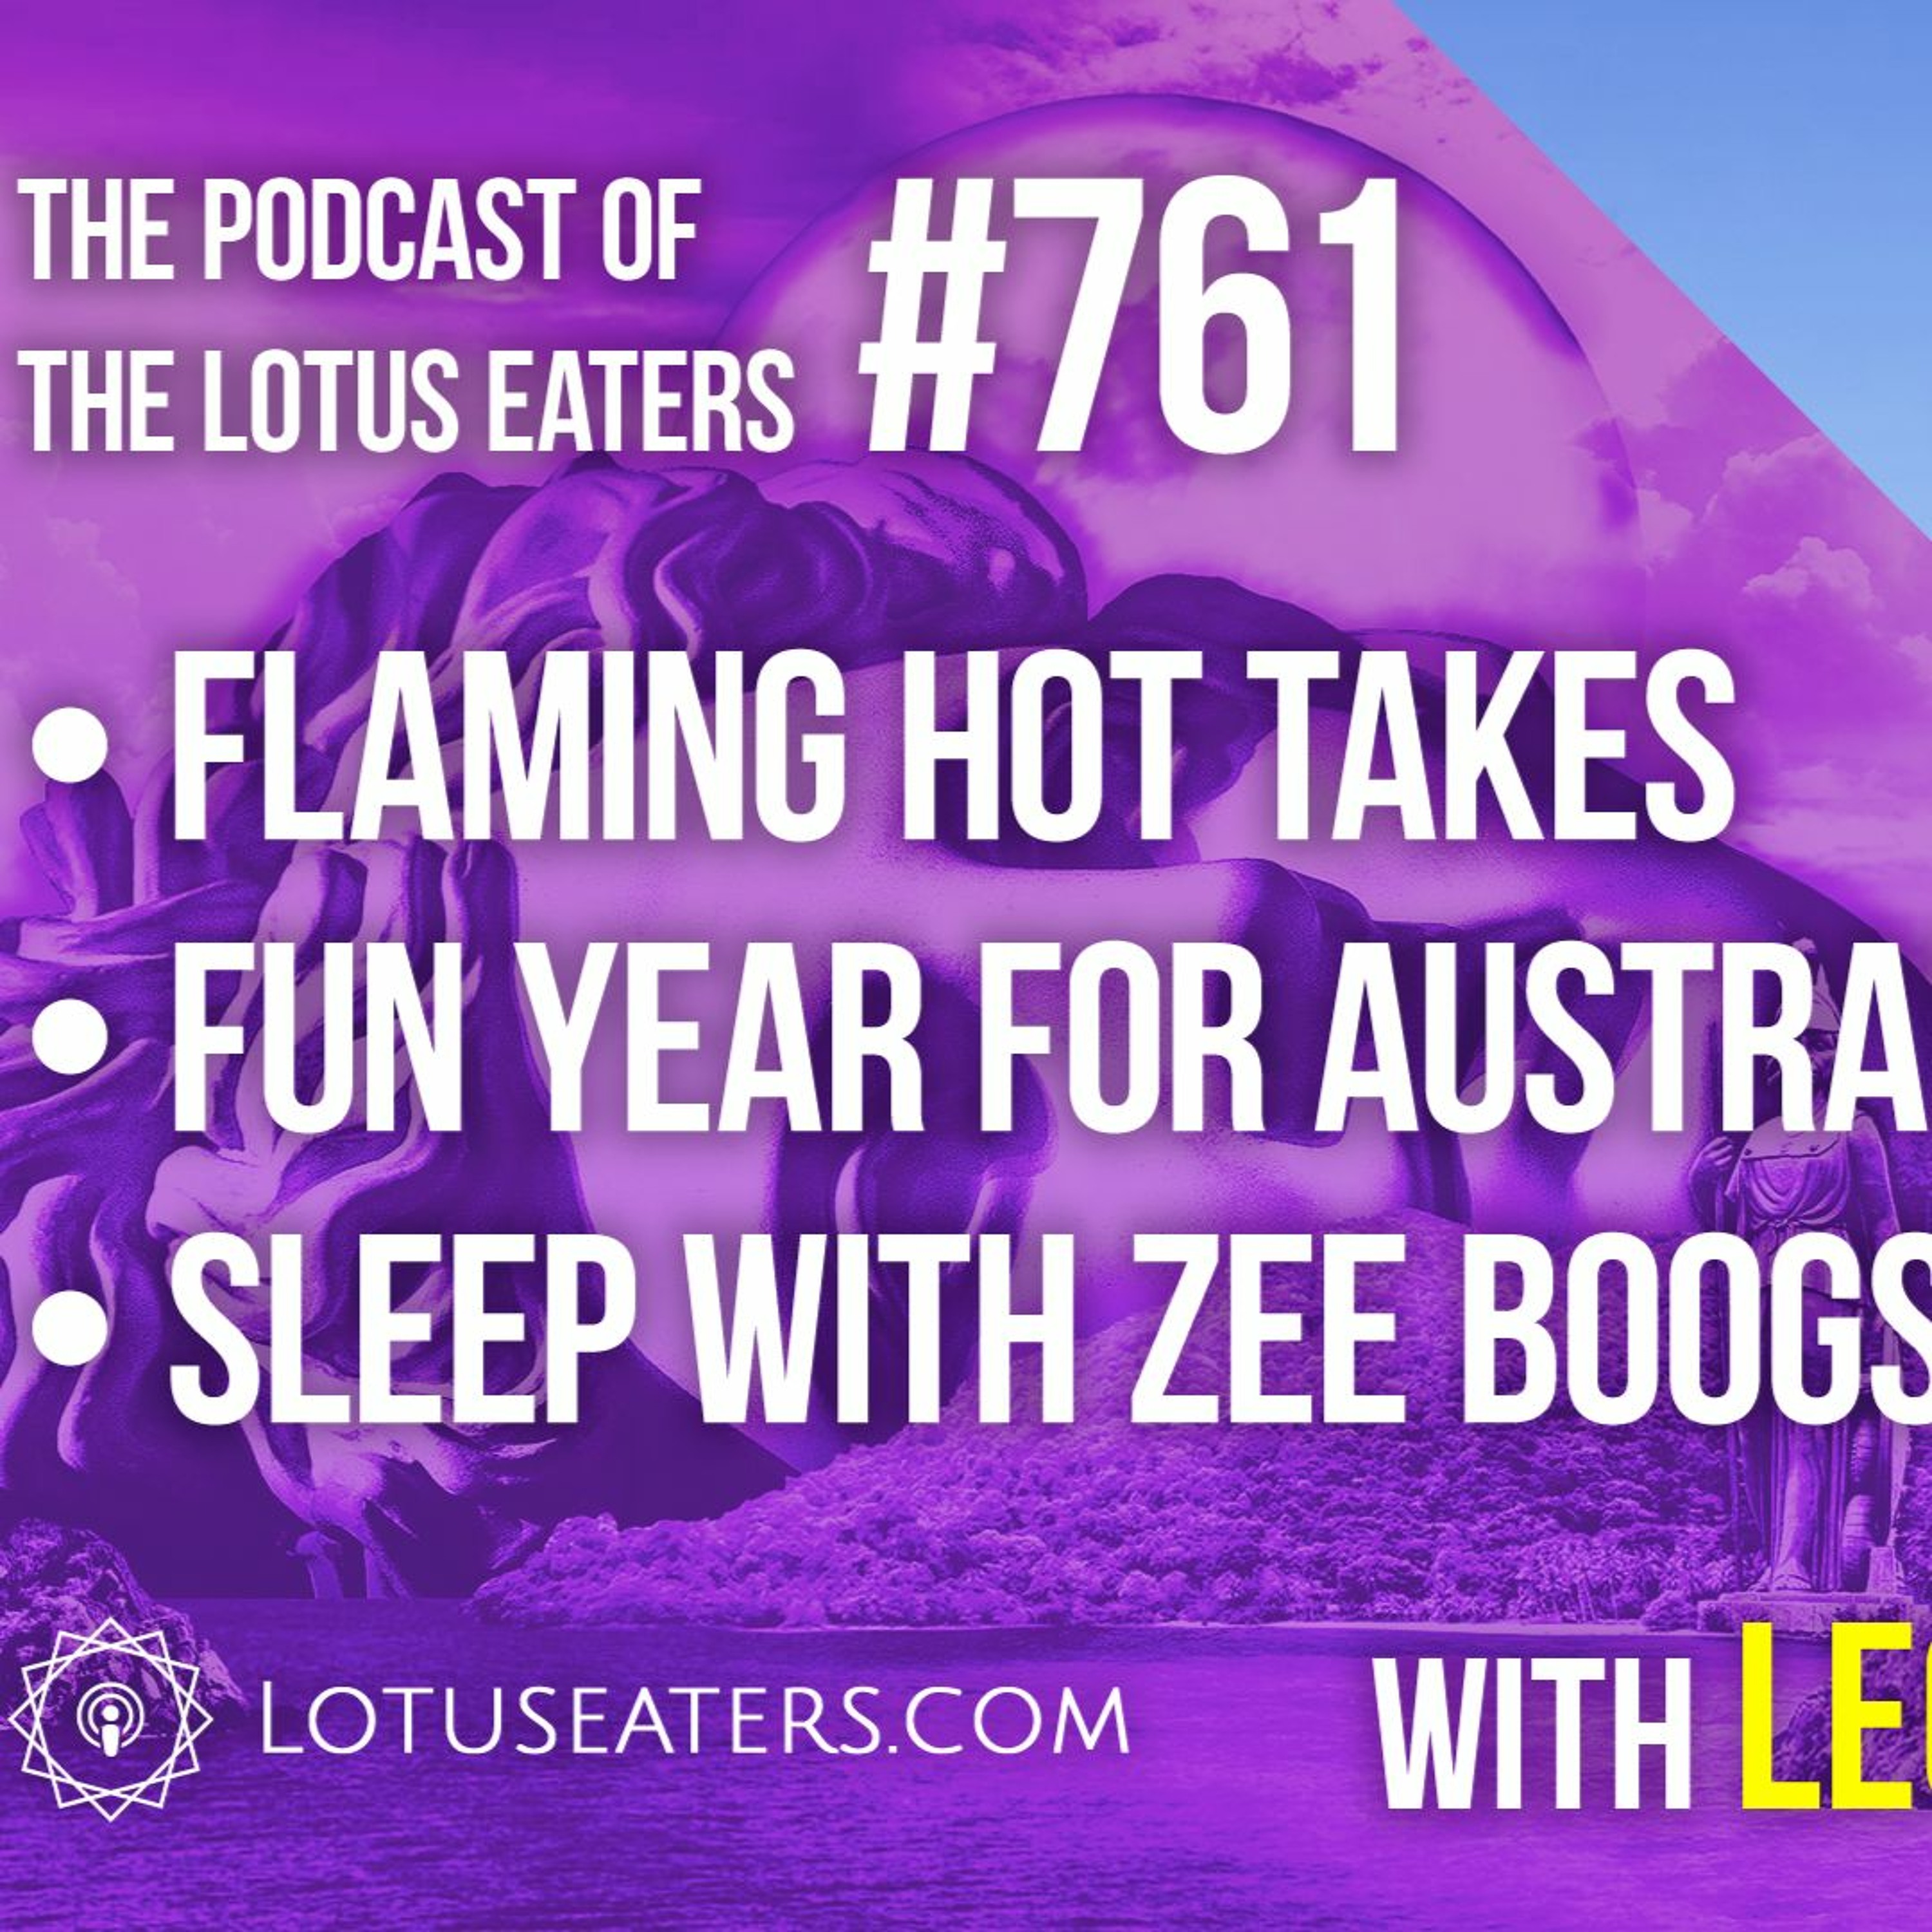 The Podcast of the Lotus Eaters #761